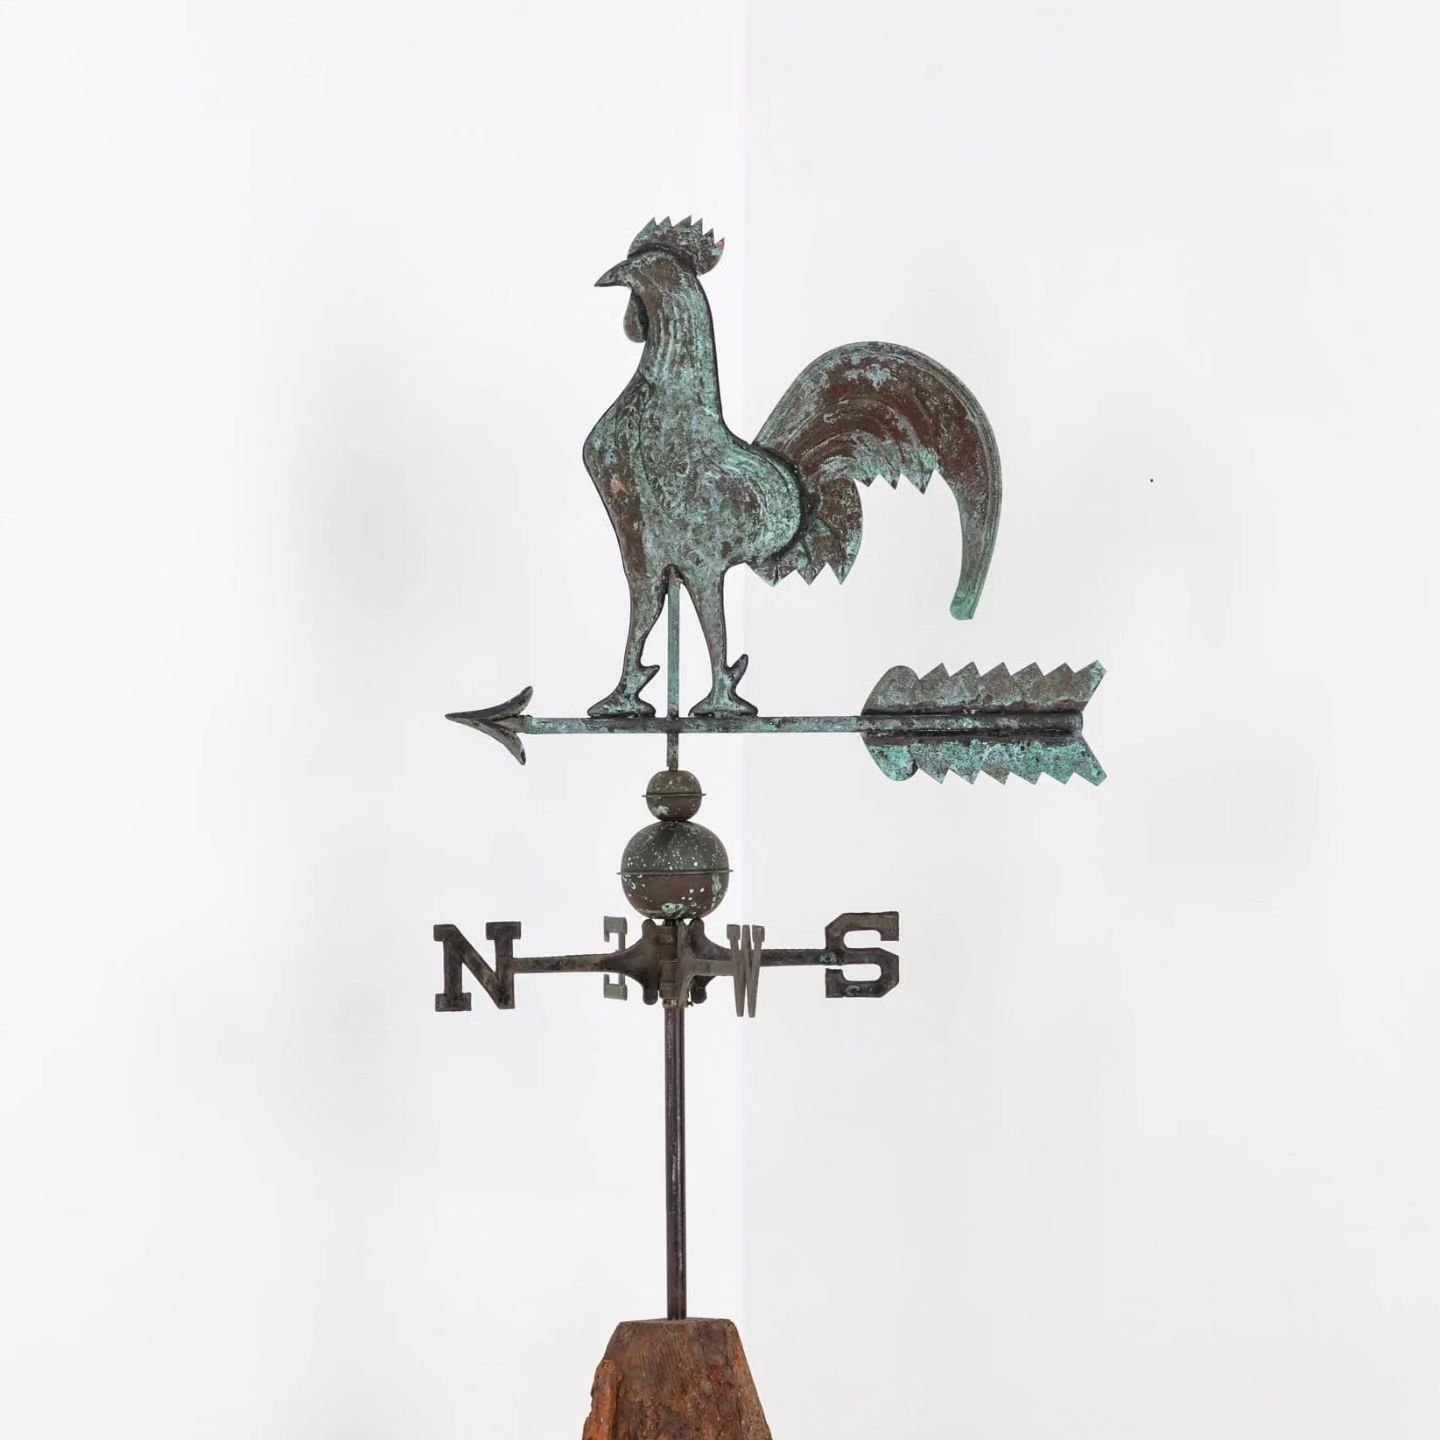 A fine example of a Victorian weathervane in the form of a cockerel, mounted to an old and well weathered groyne block. Copper construction with a wonderful natural verdigris. 

#antiquesworkshop #vintageindustrial #antique #vintage #midcentury #anti